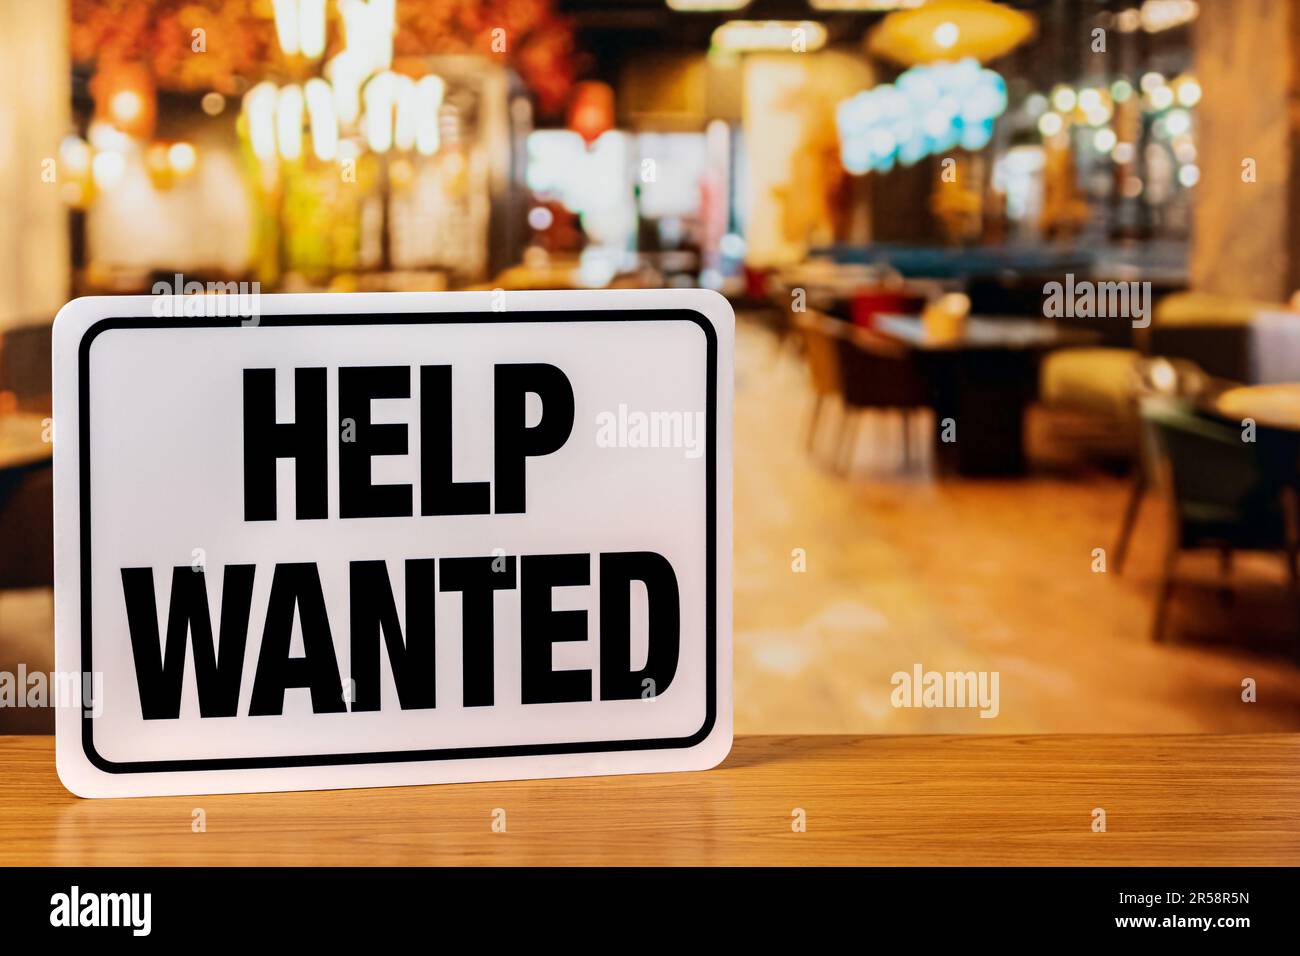 Help wanted sign inside restaurant. Food service industry jobs, labor shortage and unemployment concept. Stock Photo